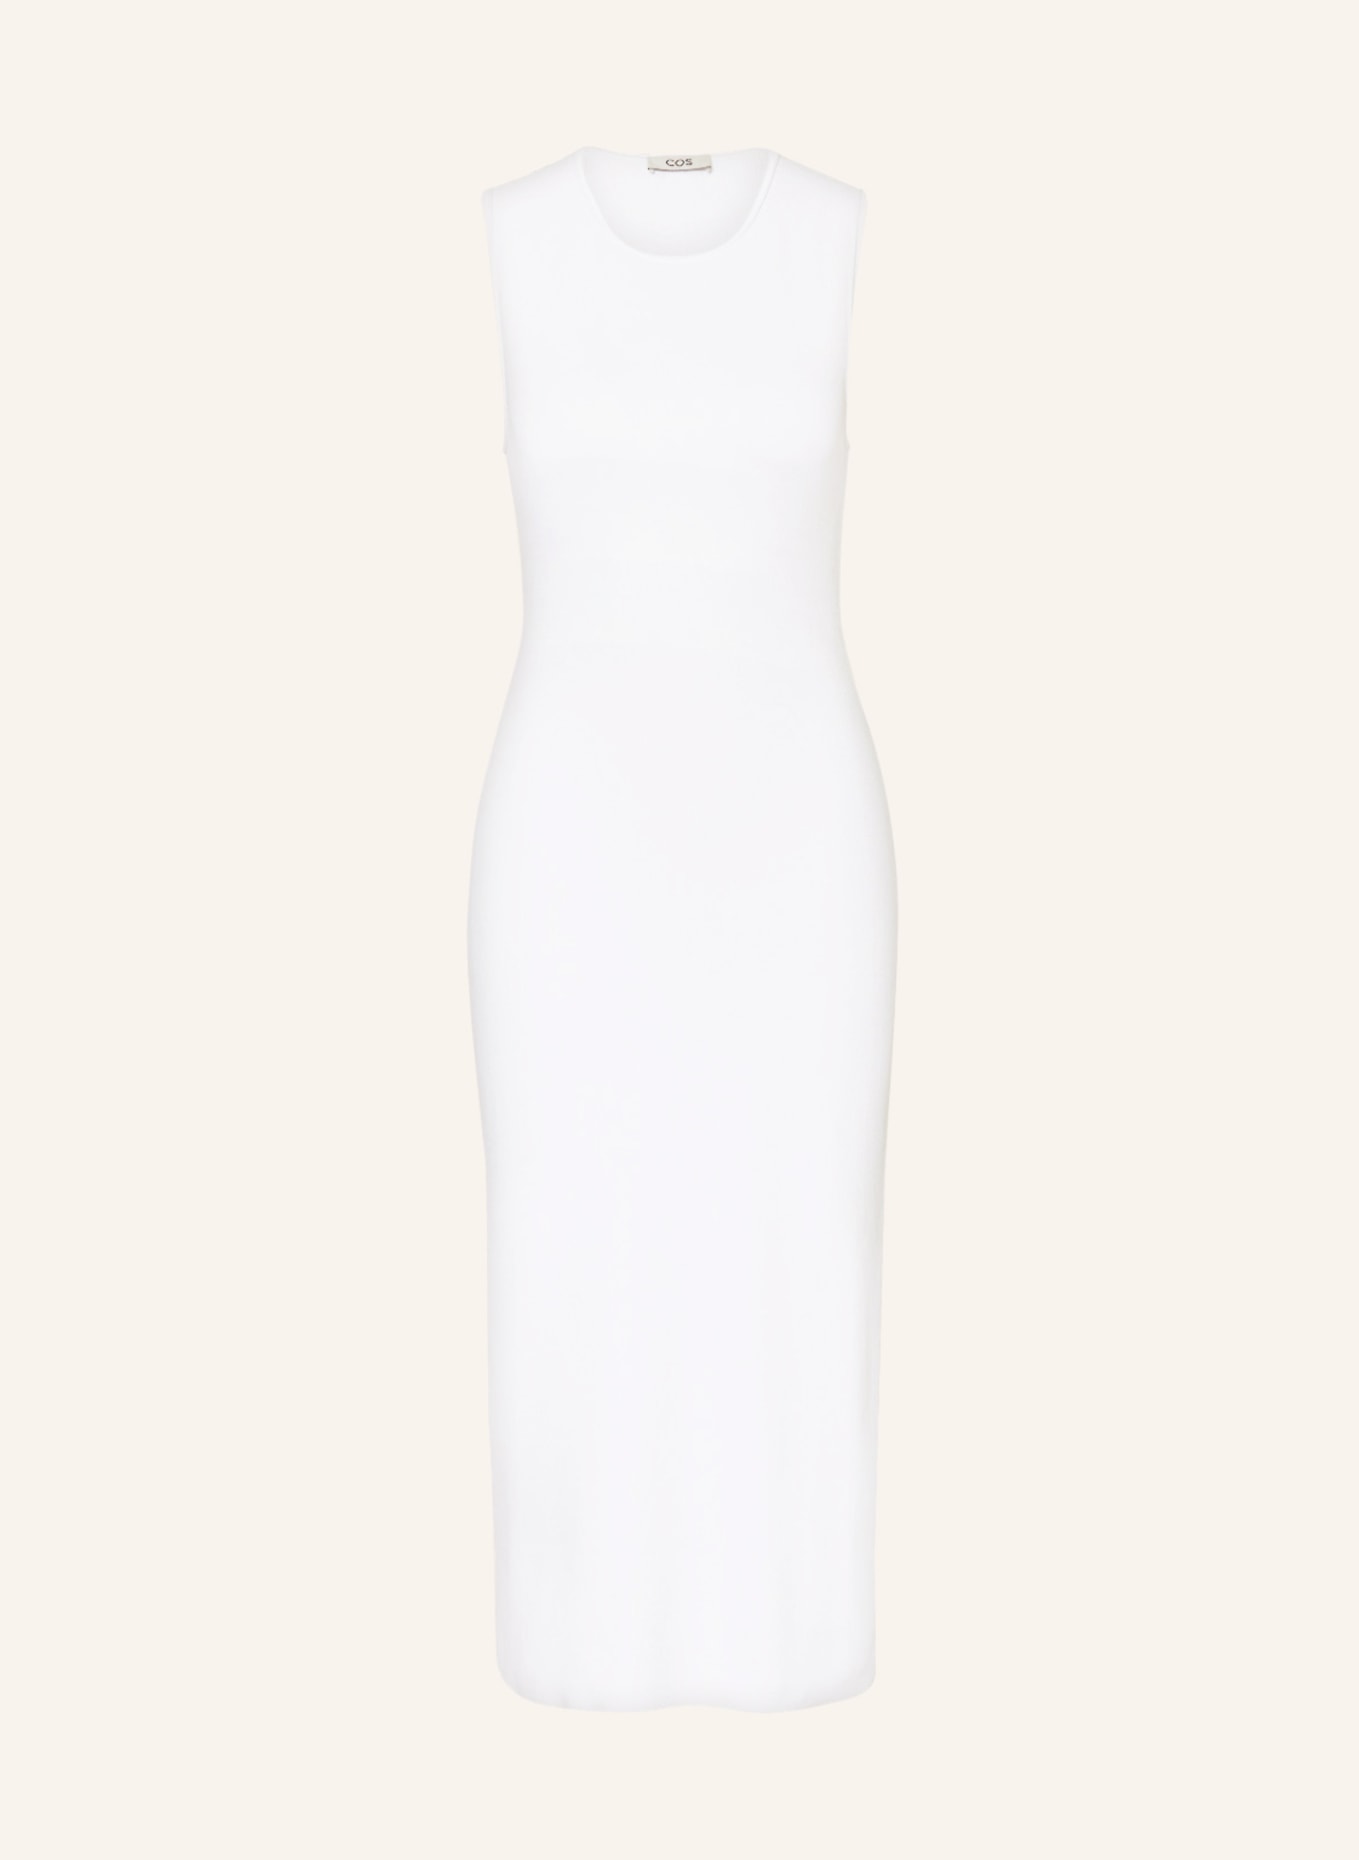 COS Jersey dress, Color: WHITE (Image 1)